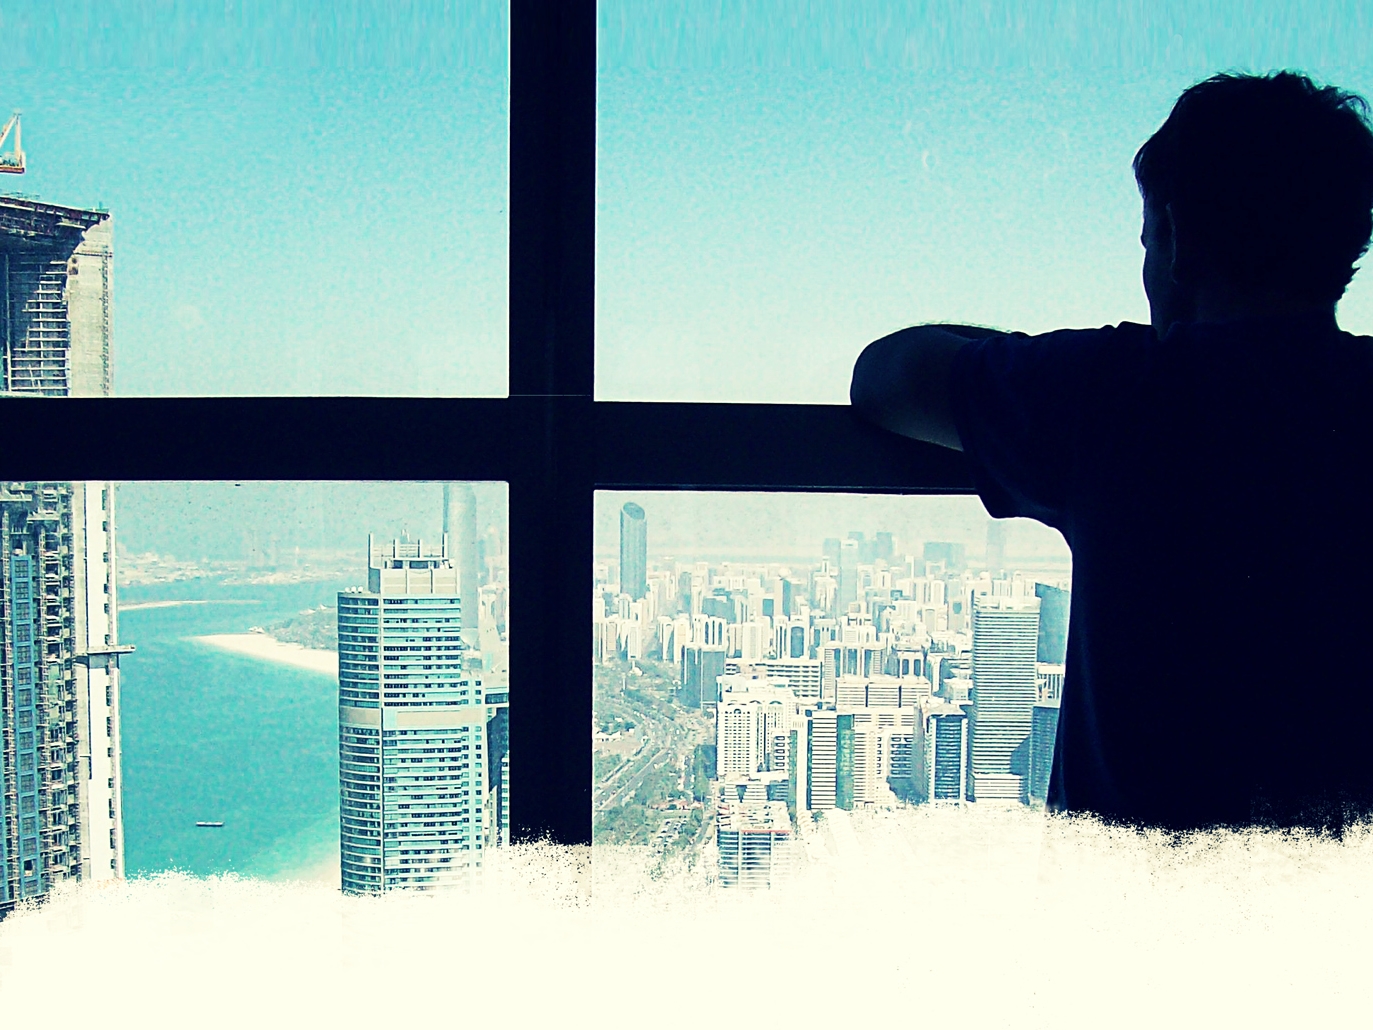 Male looks out at skyscrapers of a metropolis on a bight, cloud free day. Lead film image